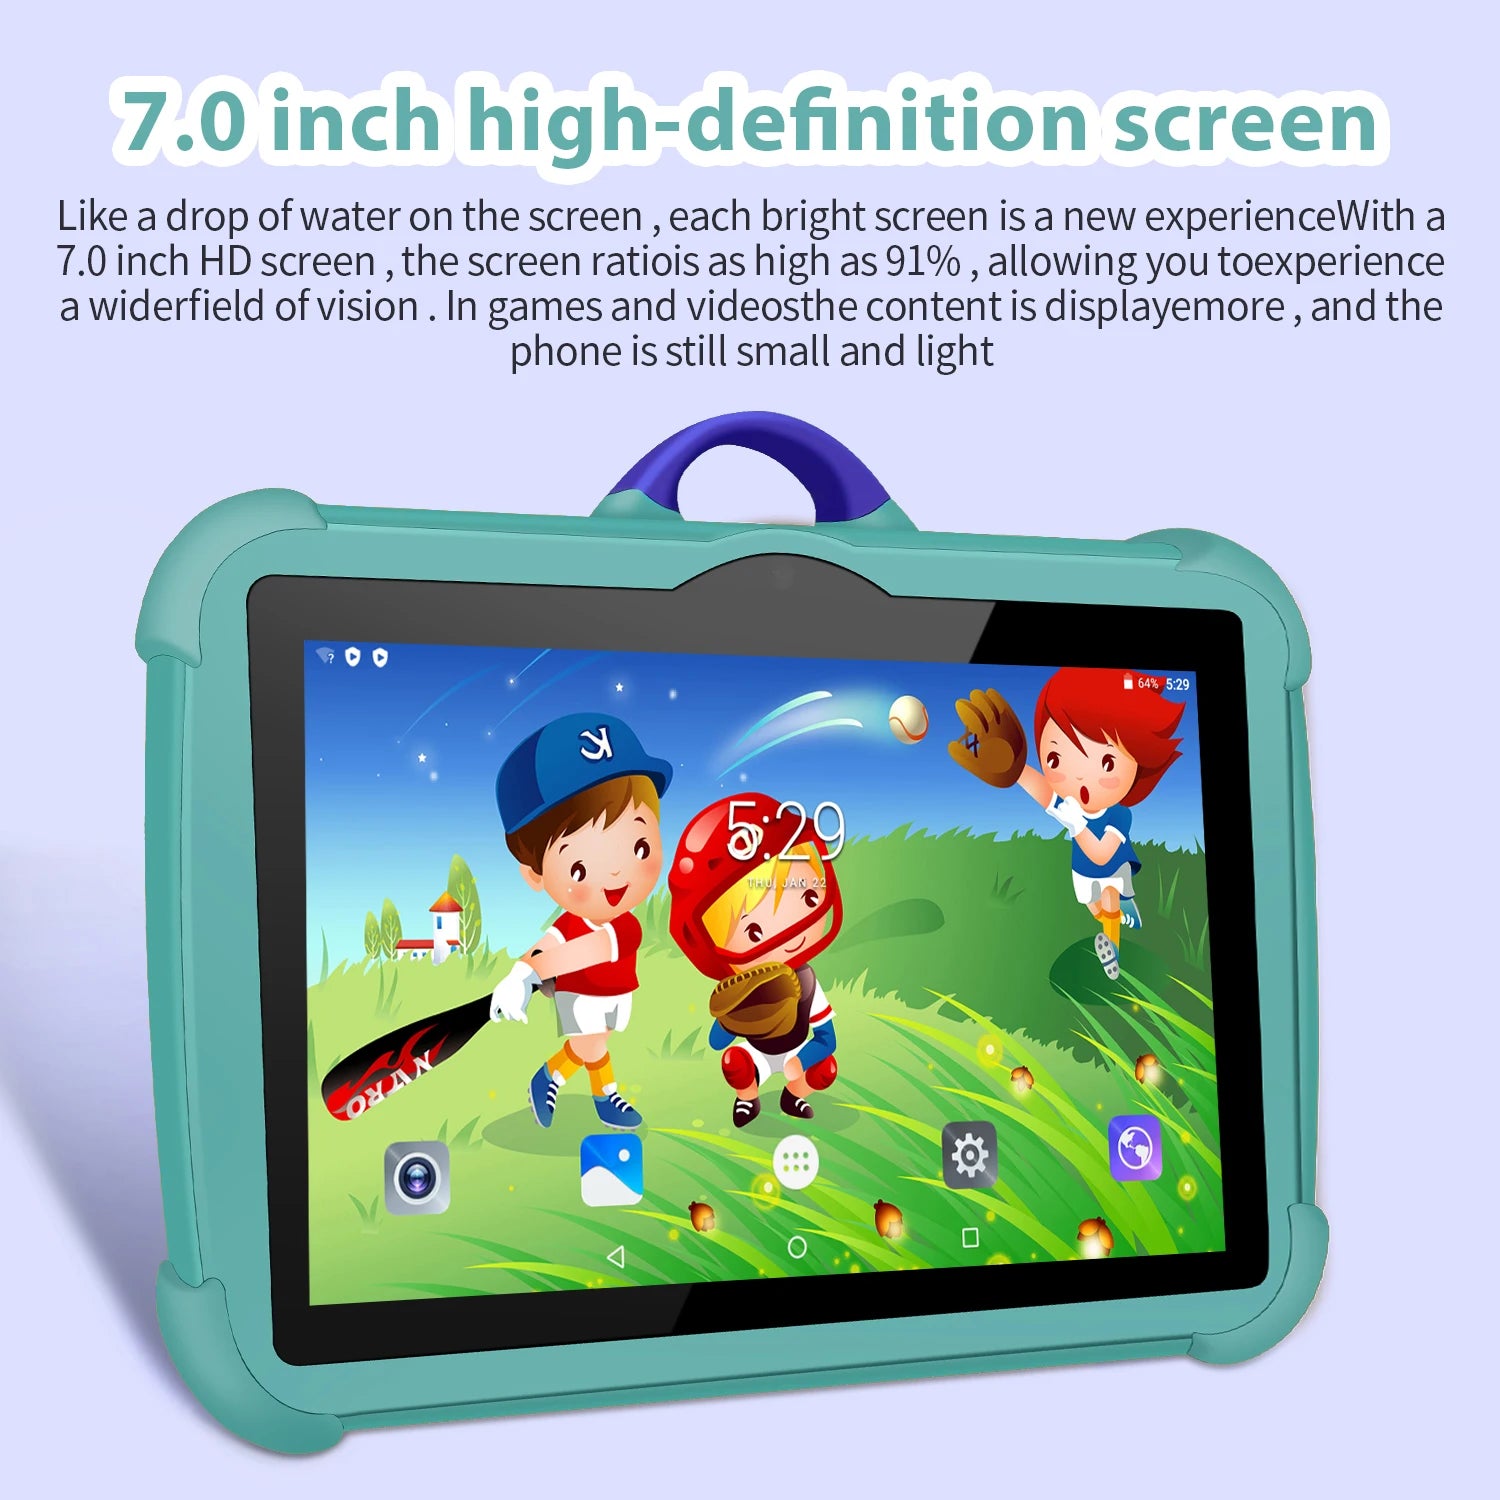 New 7 Inch Google Learning Education Games Kids' tablet Quad Core 4GB RAM 64GB ROM 5G WiFi Tablets Cheap Simple Children's Gifts